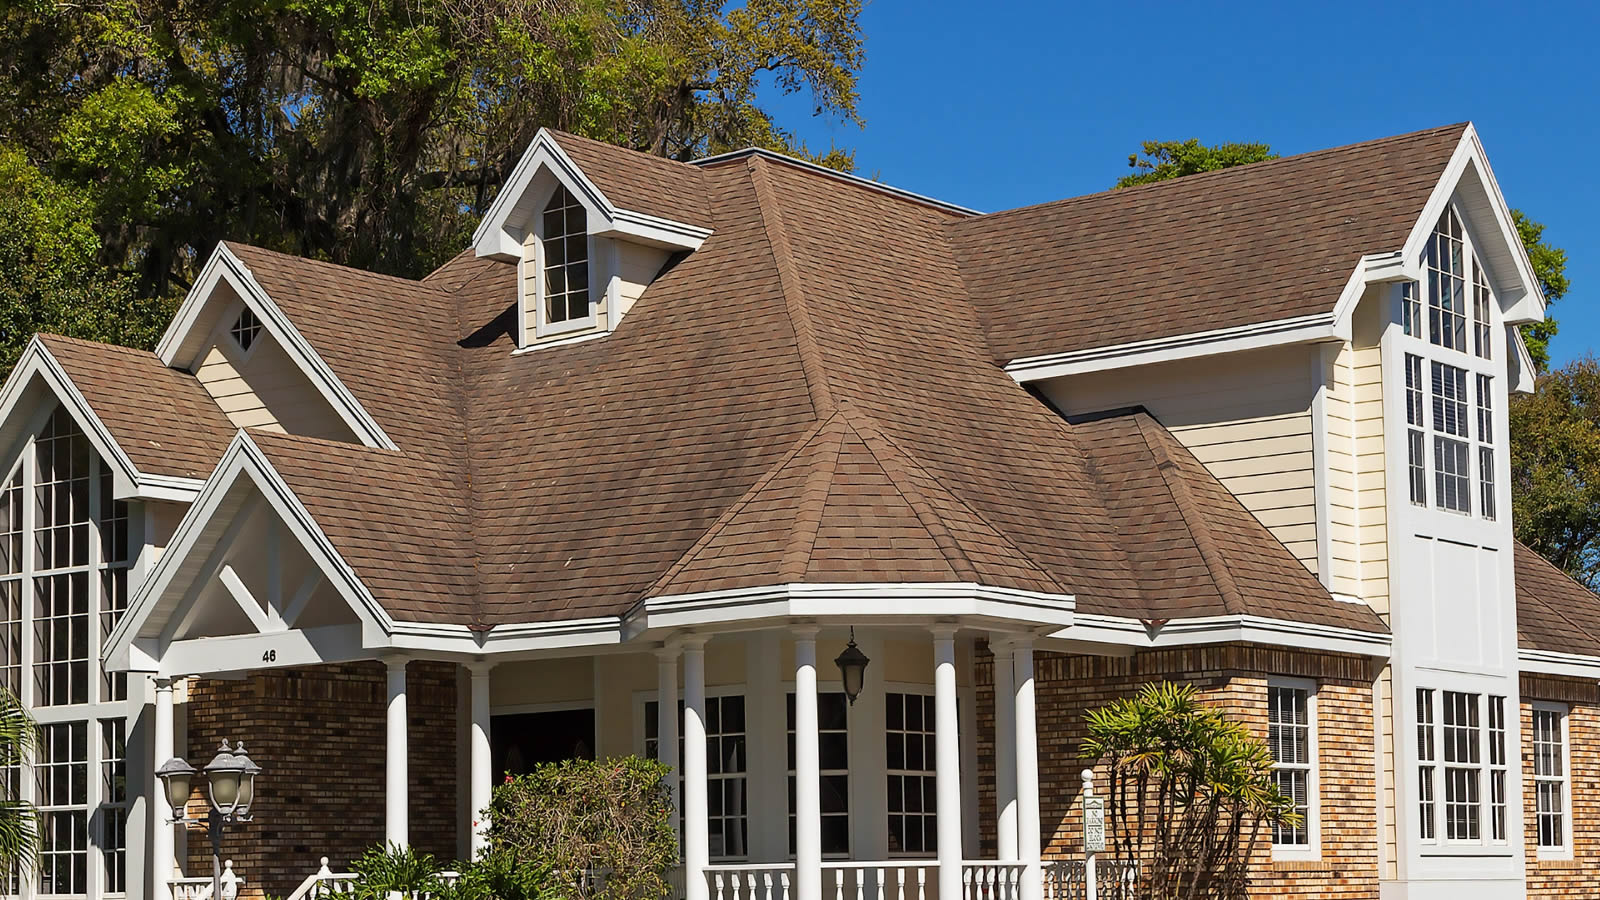 Local Mableton Roofing Contractor 